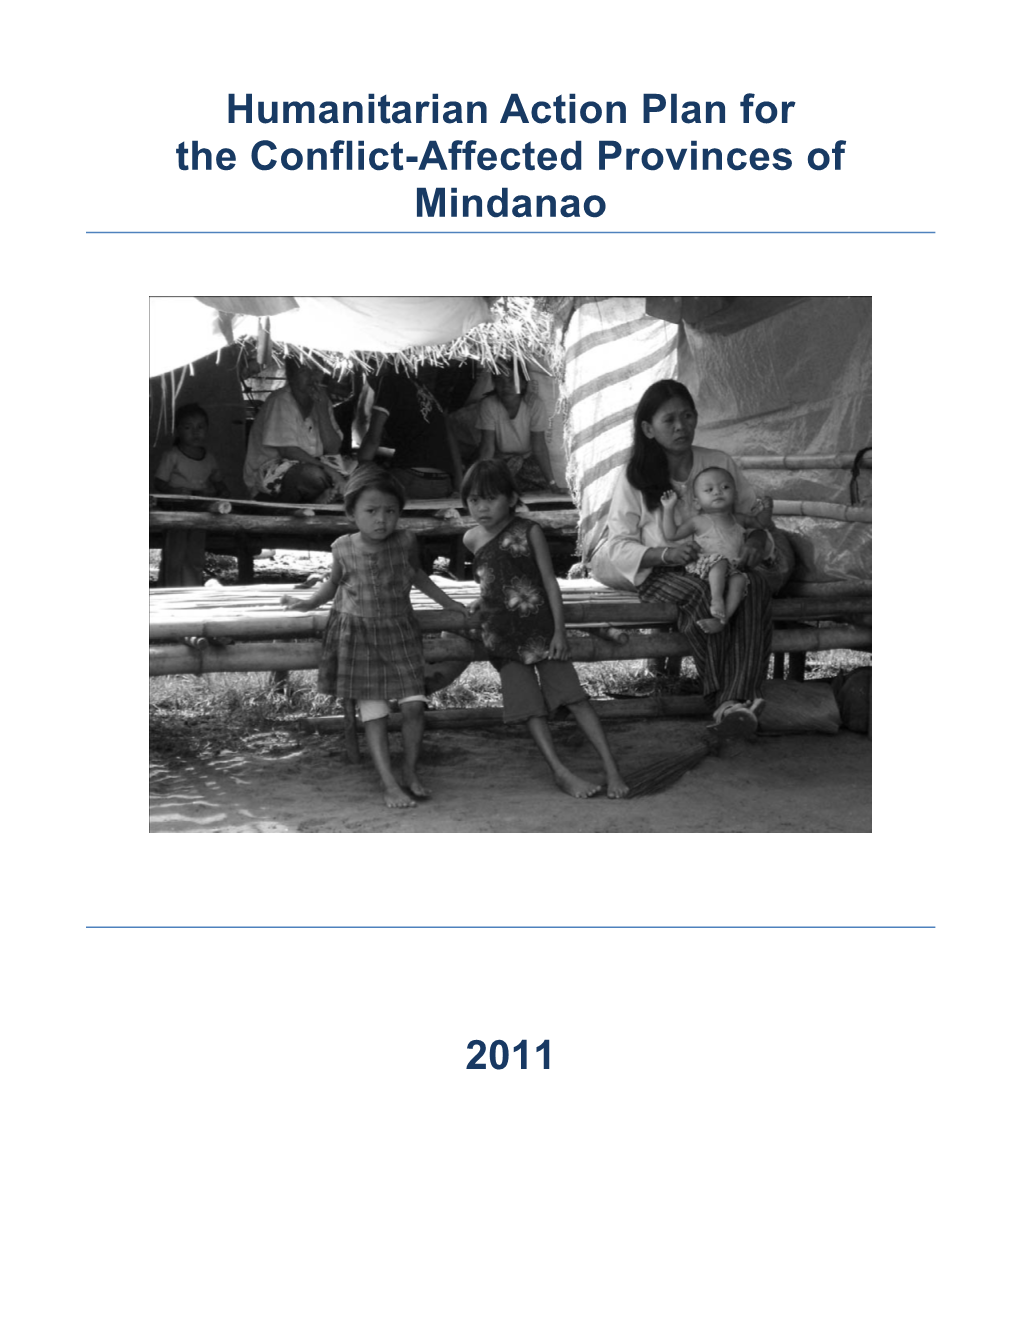 Humanitarian Action Plan for the Conflict-Affected Provinces of Mindanao 2011